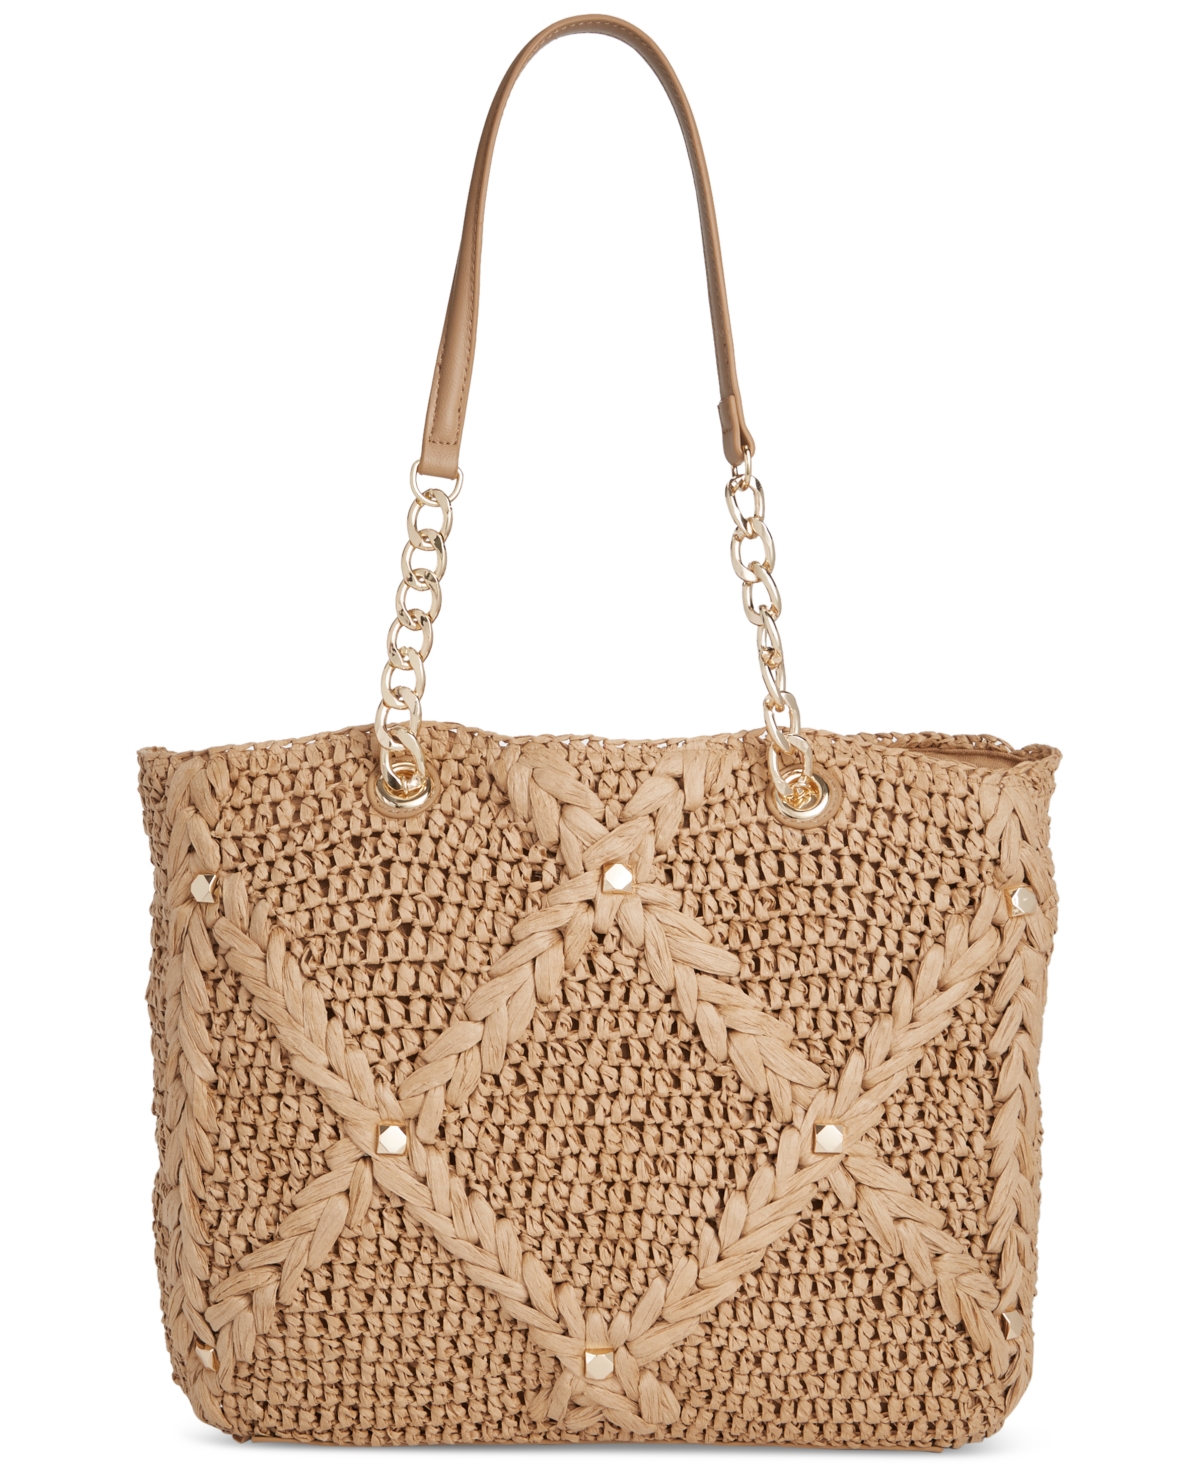 Mariahh Studded Extra-Large Woven Straw Tote, Created for Macy's - Natural Straw